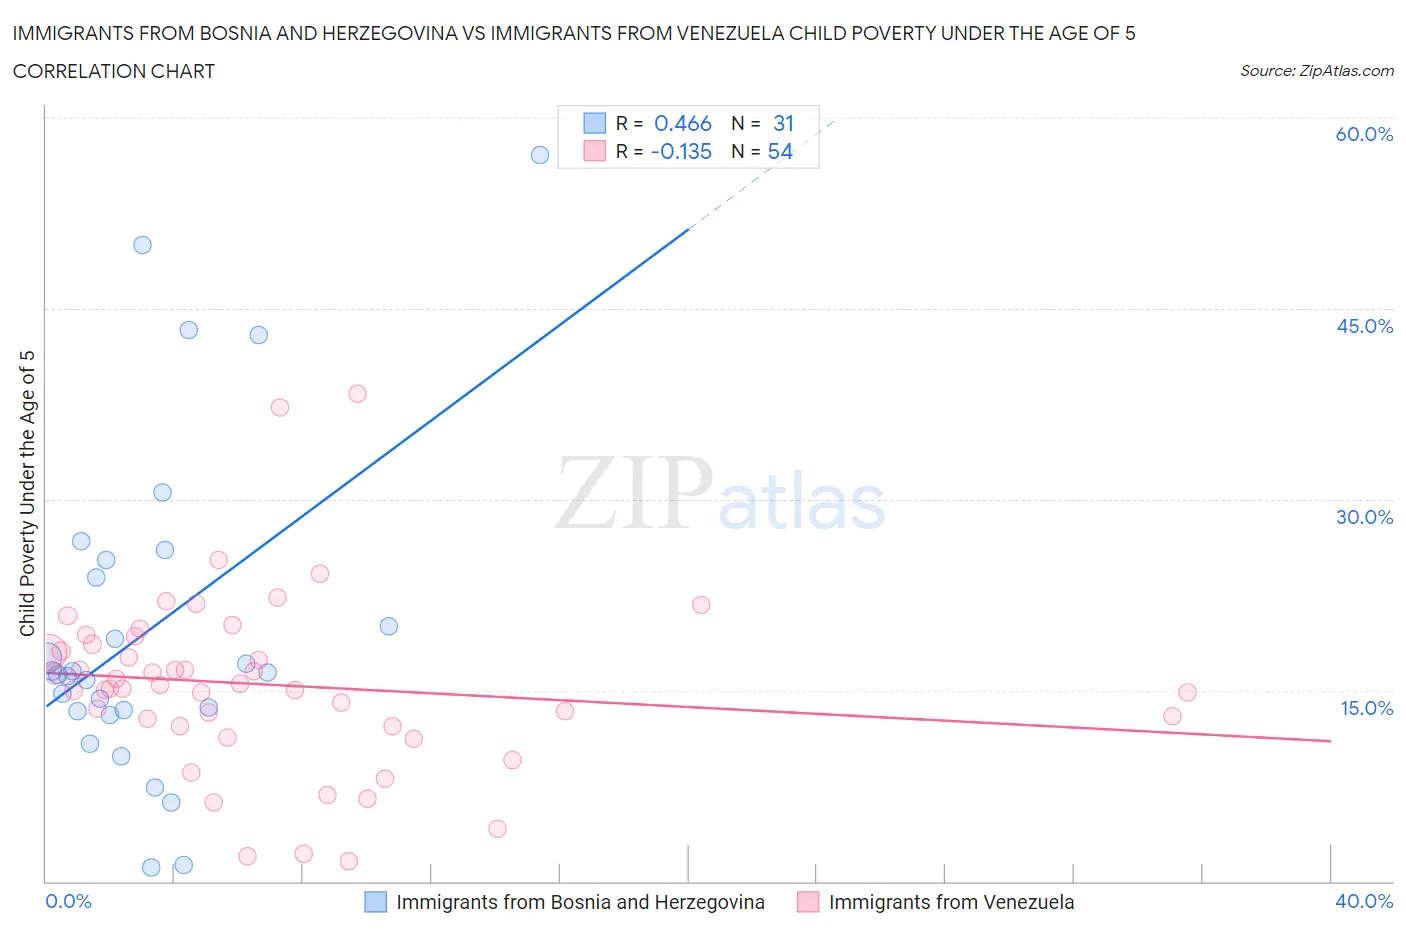 Immigrants from Bosnia and Herzegovina vs Immigrants from Venezuela Child Poverty Under the Age of 5